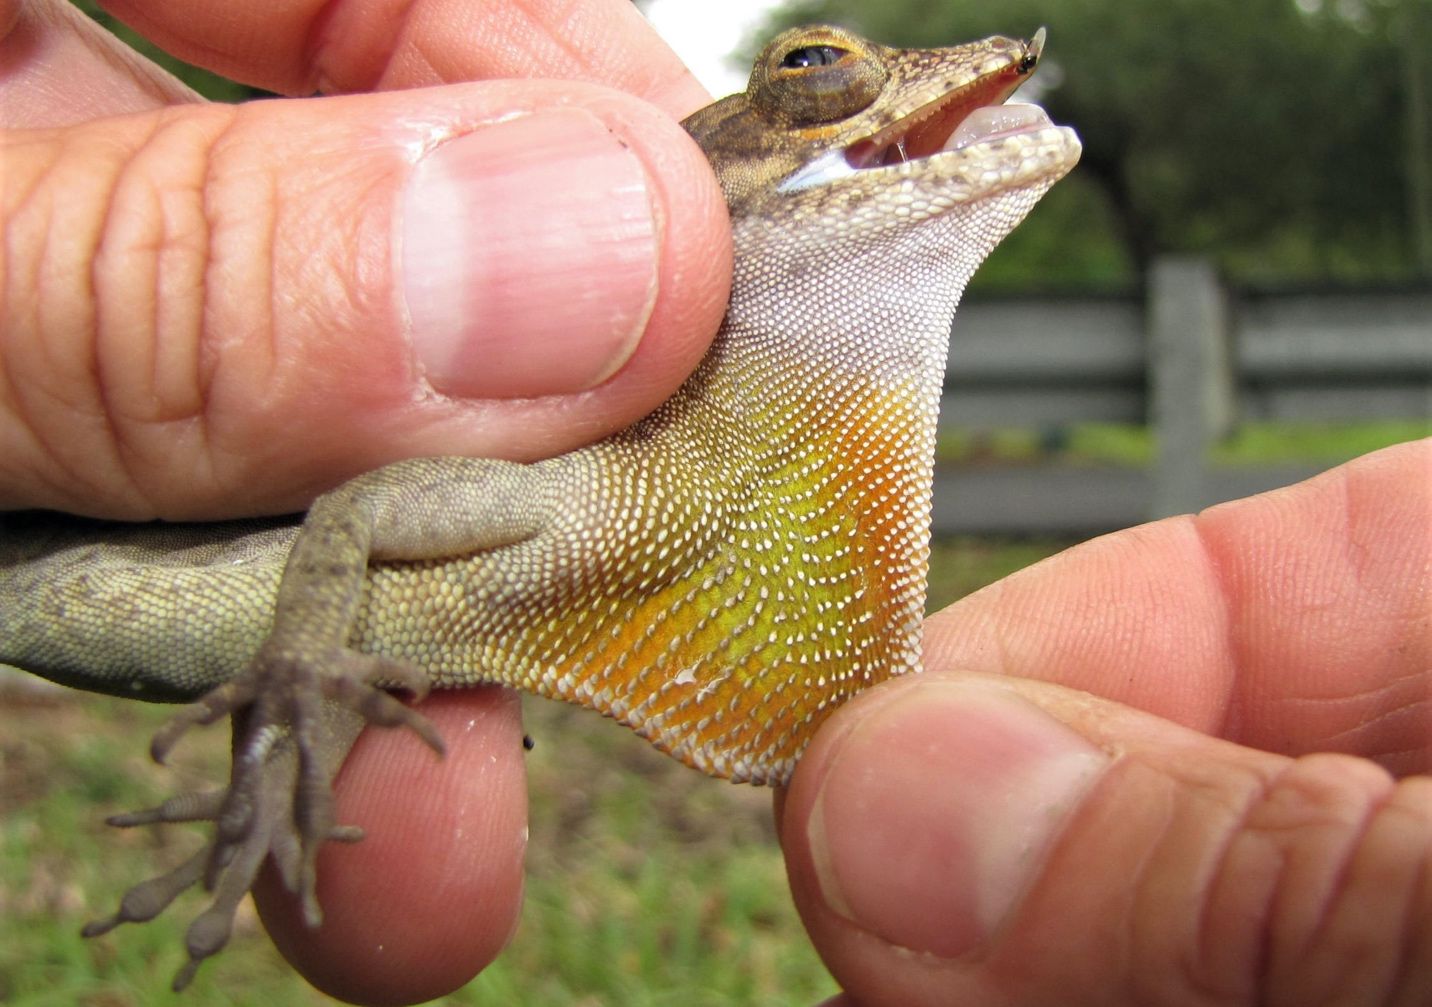 The dewlap of male crested anoles (Anolis cristatellus) has a yellow-colored center. This species occurs primarily in south Florida in Miami-Dade County